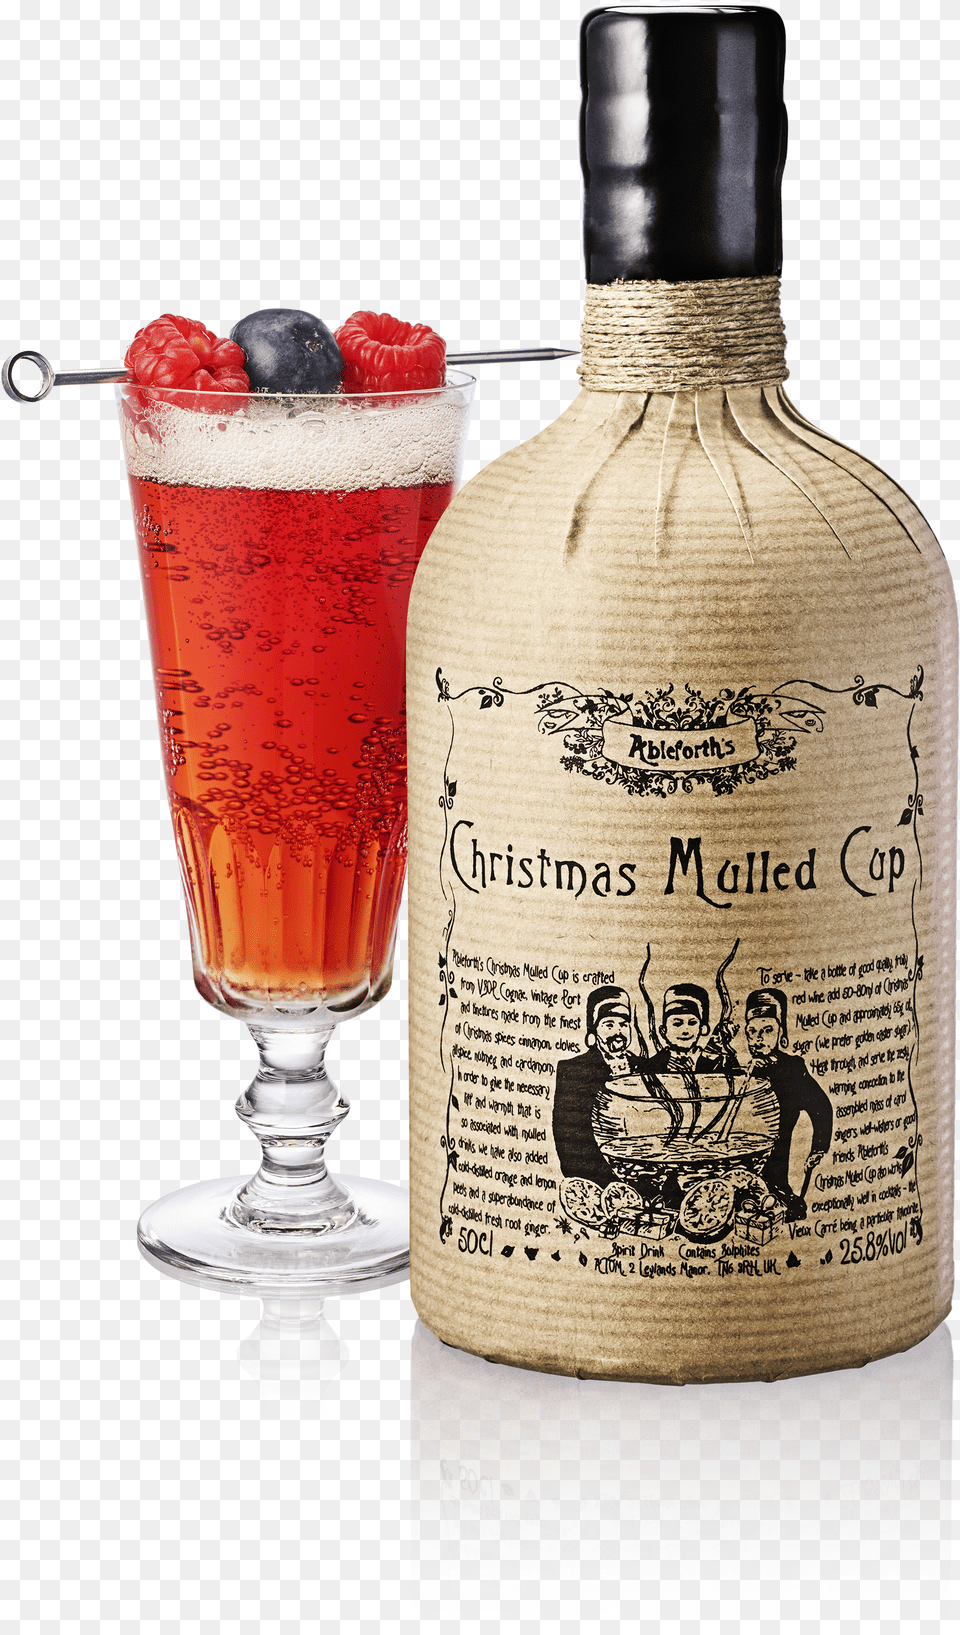 Christmas Mulled Cup Amp Kir Noel Wine Cocktail, Logo, Architecture, Building, Housing Free Png